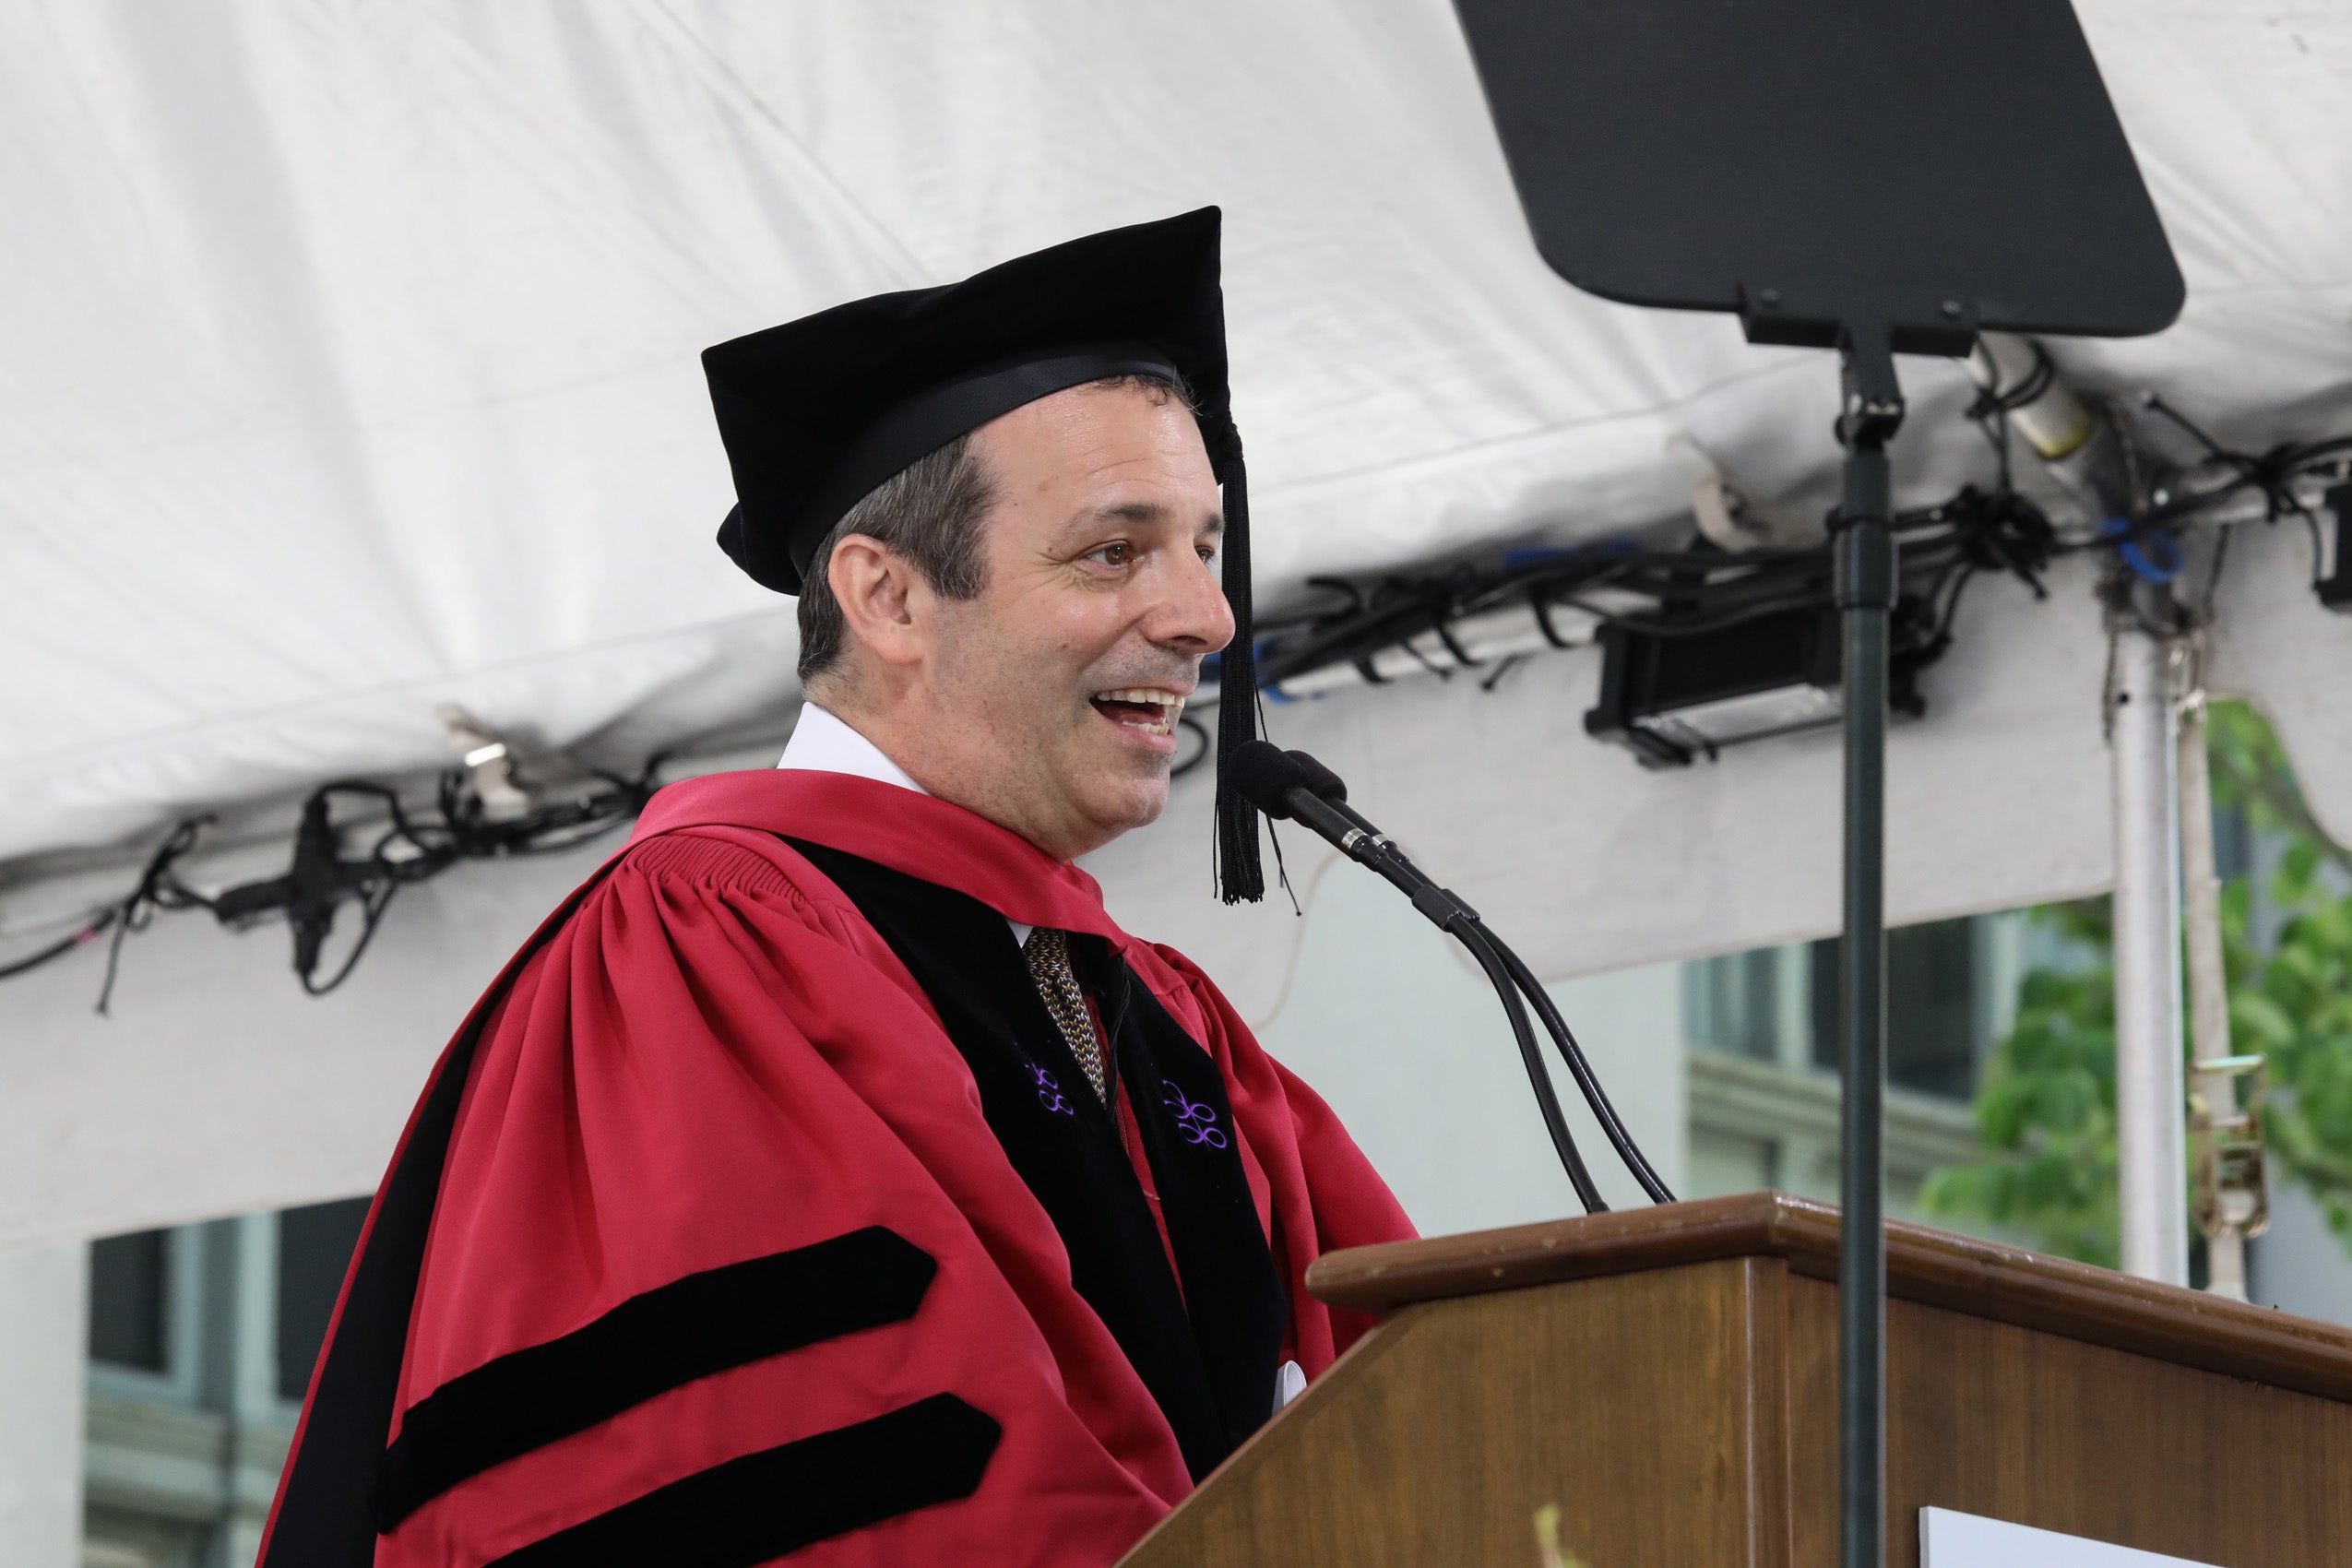 In commencement address, Dean Manning shares 'canons for the construction of life'